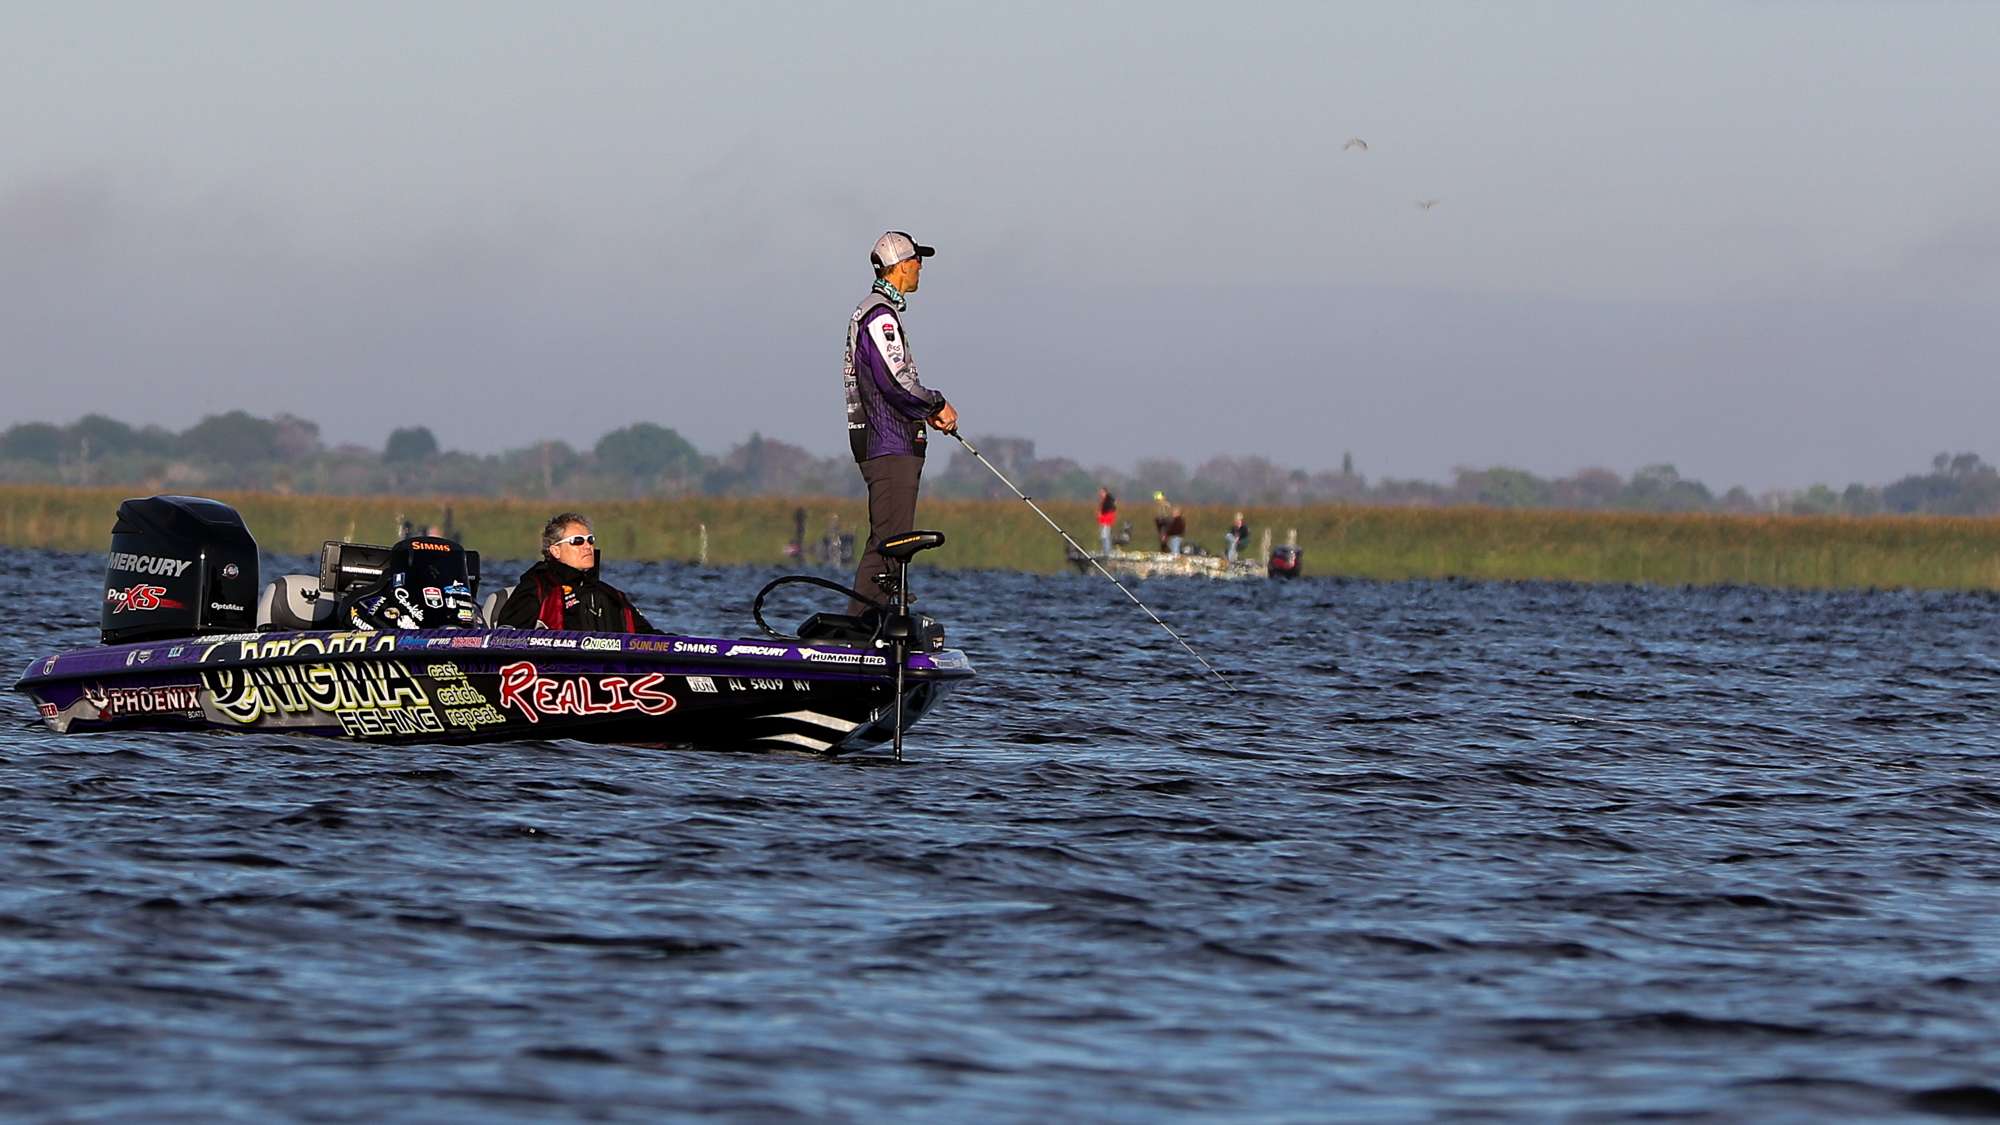 Day 1 begins on the A.R.E. Truck Caps Bassmaster Elite on Lake Okeechobee and we are immediately surrounded by Elite Series anglers like Aaron Martens.